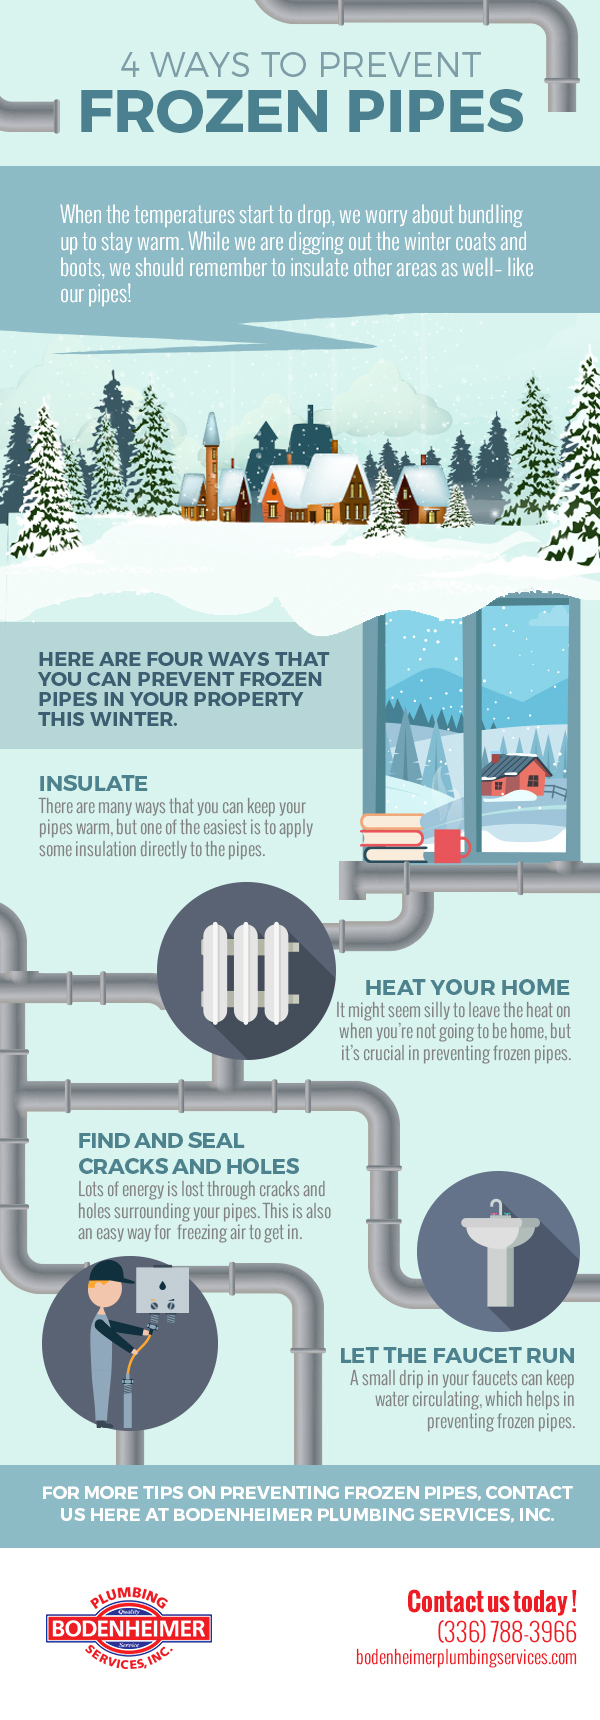 4 Ways to Prevent Frozen Pipes Infographic